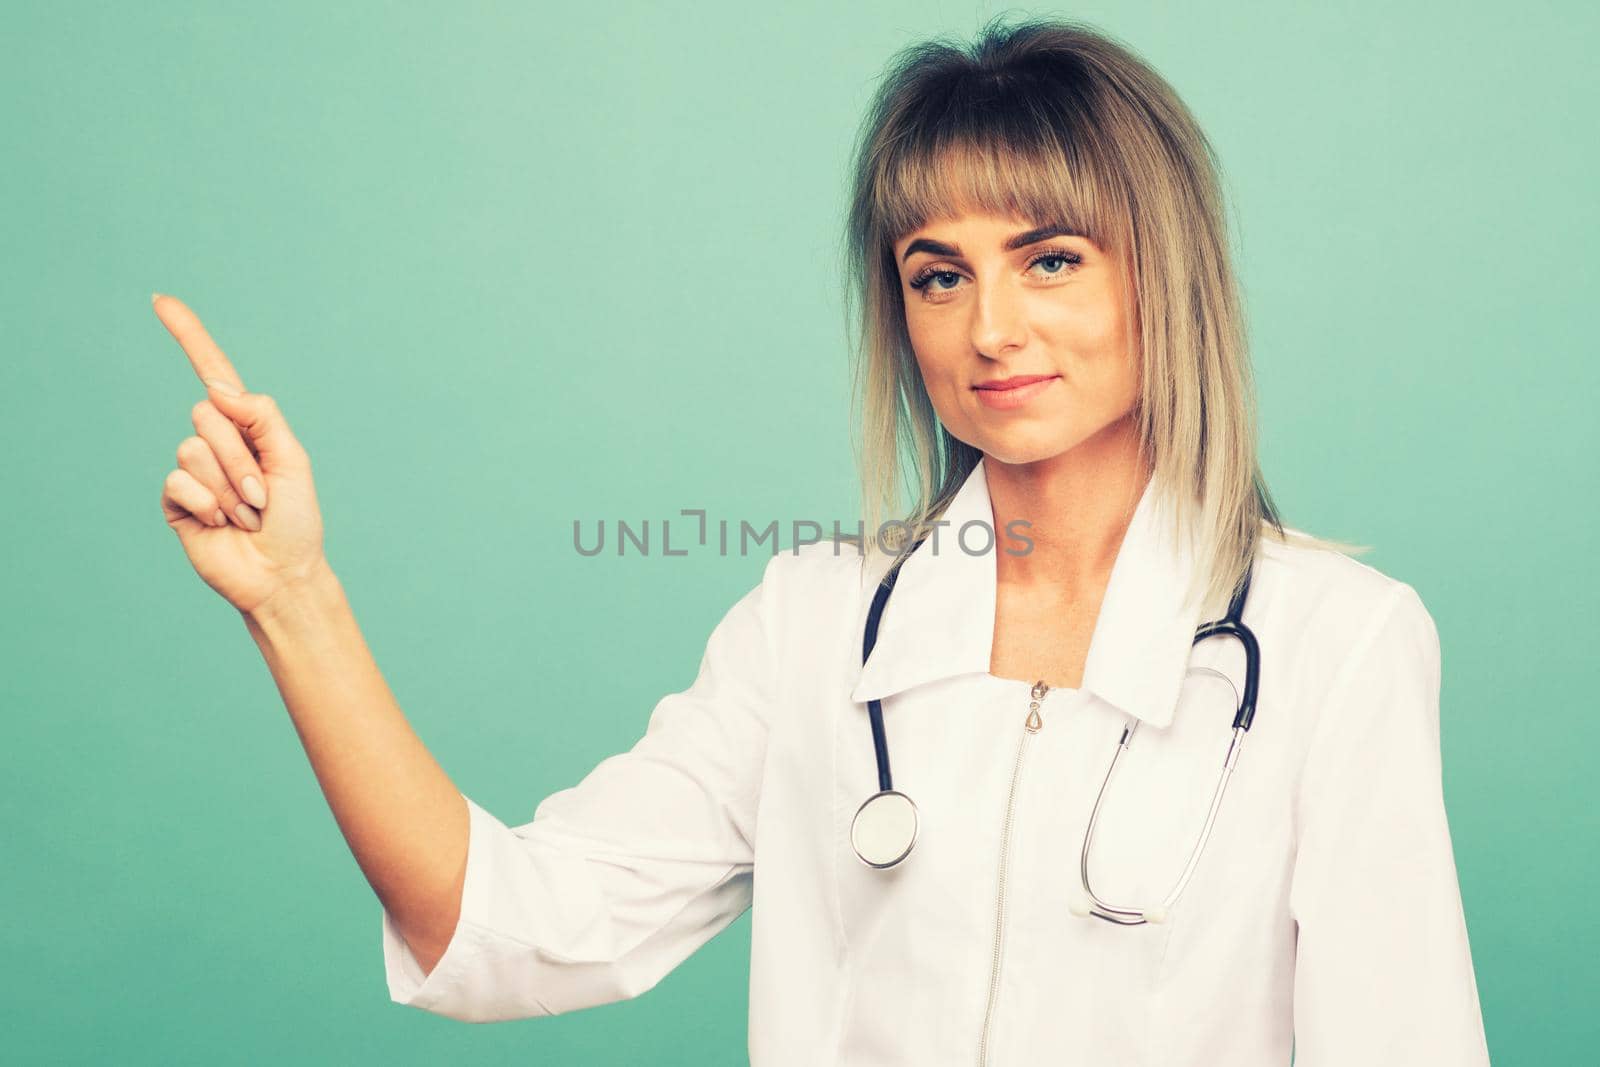 Smiling young female doctor with a stethoscope points up her fingers on a blue background